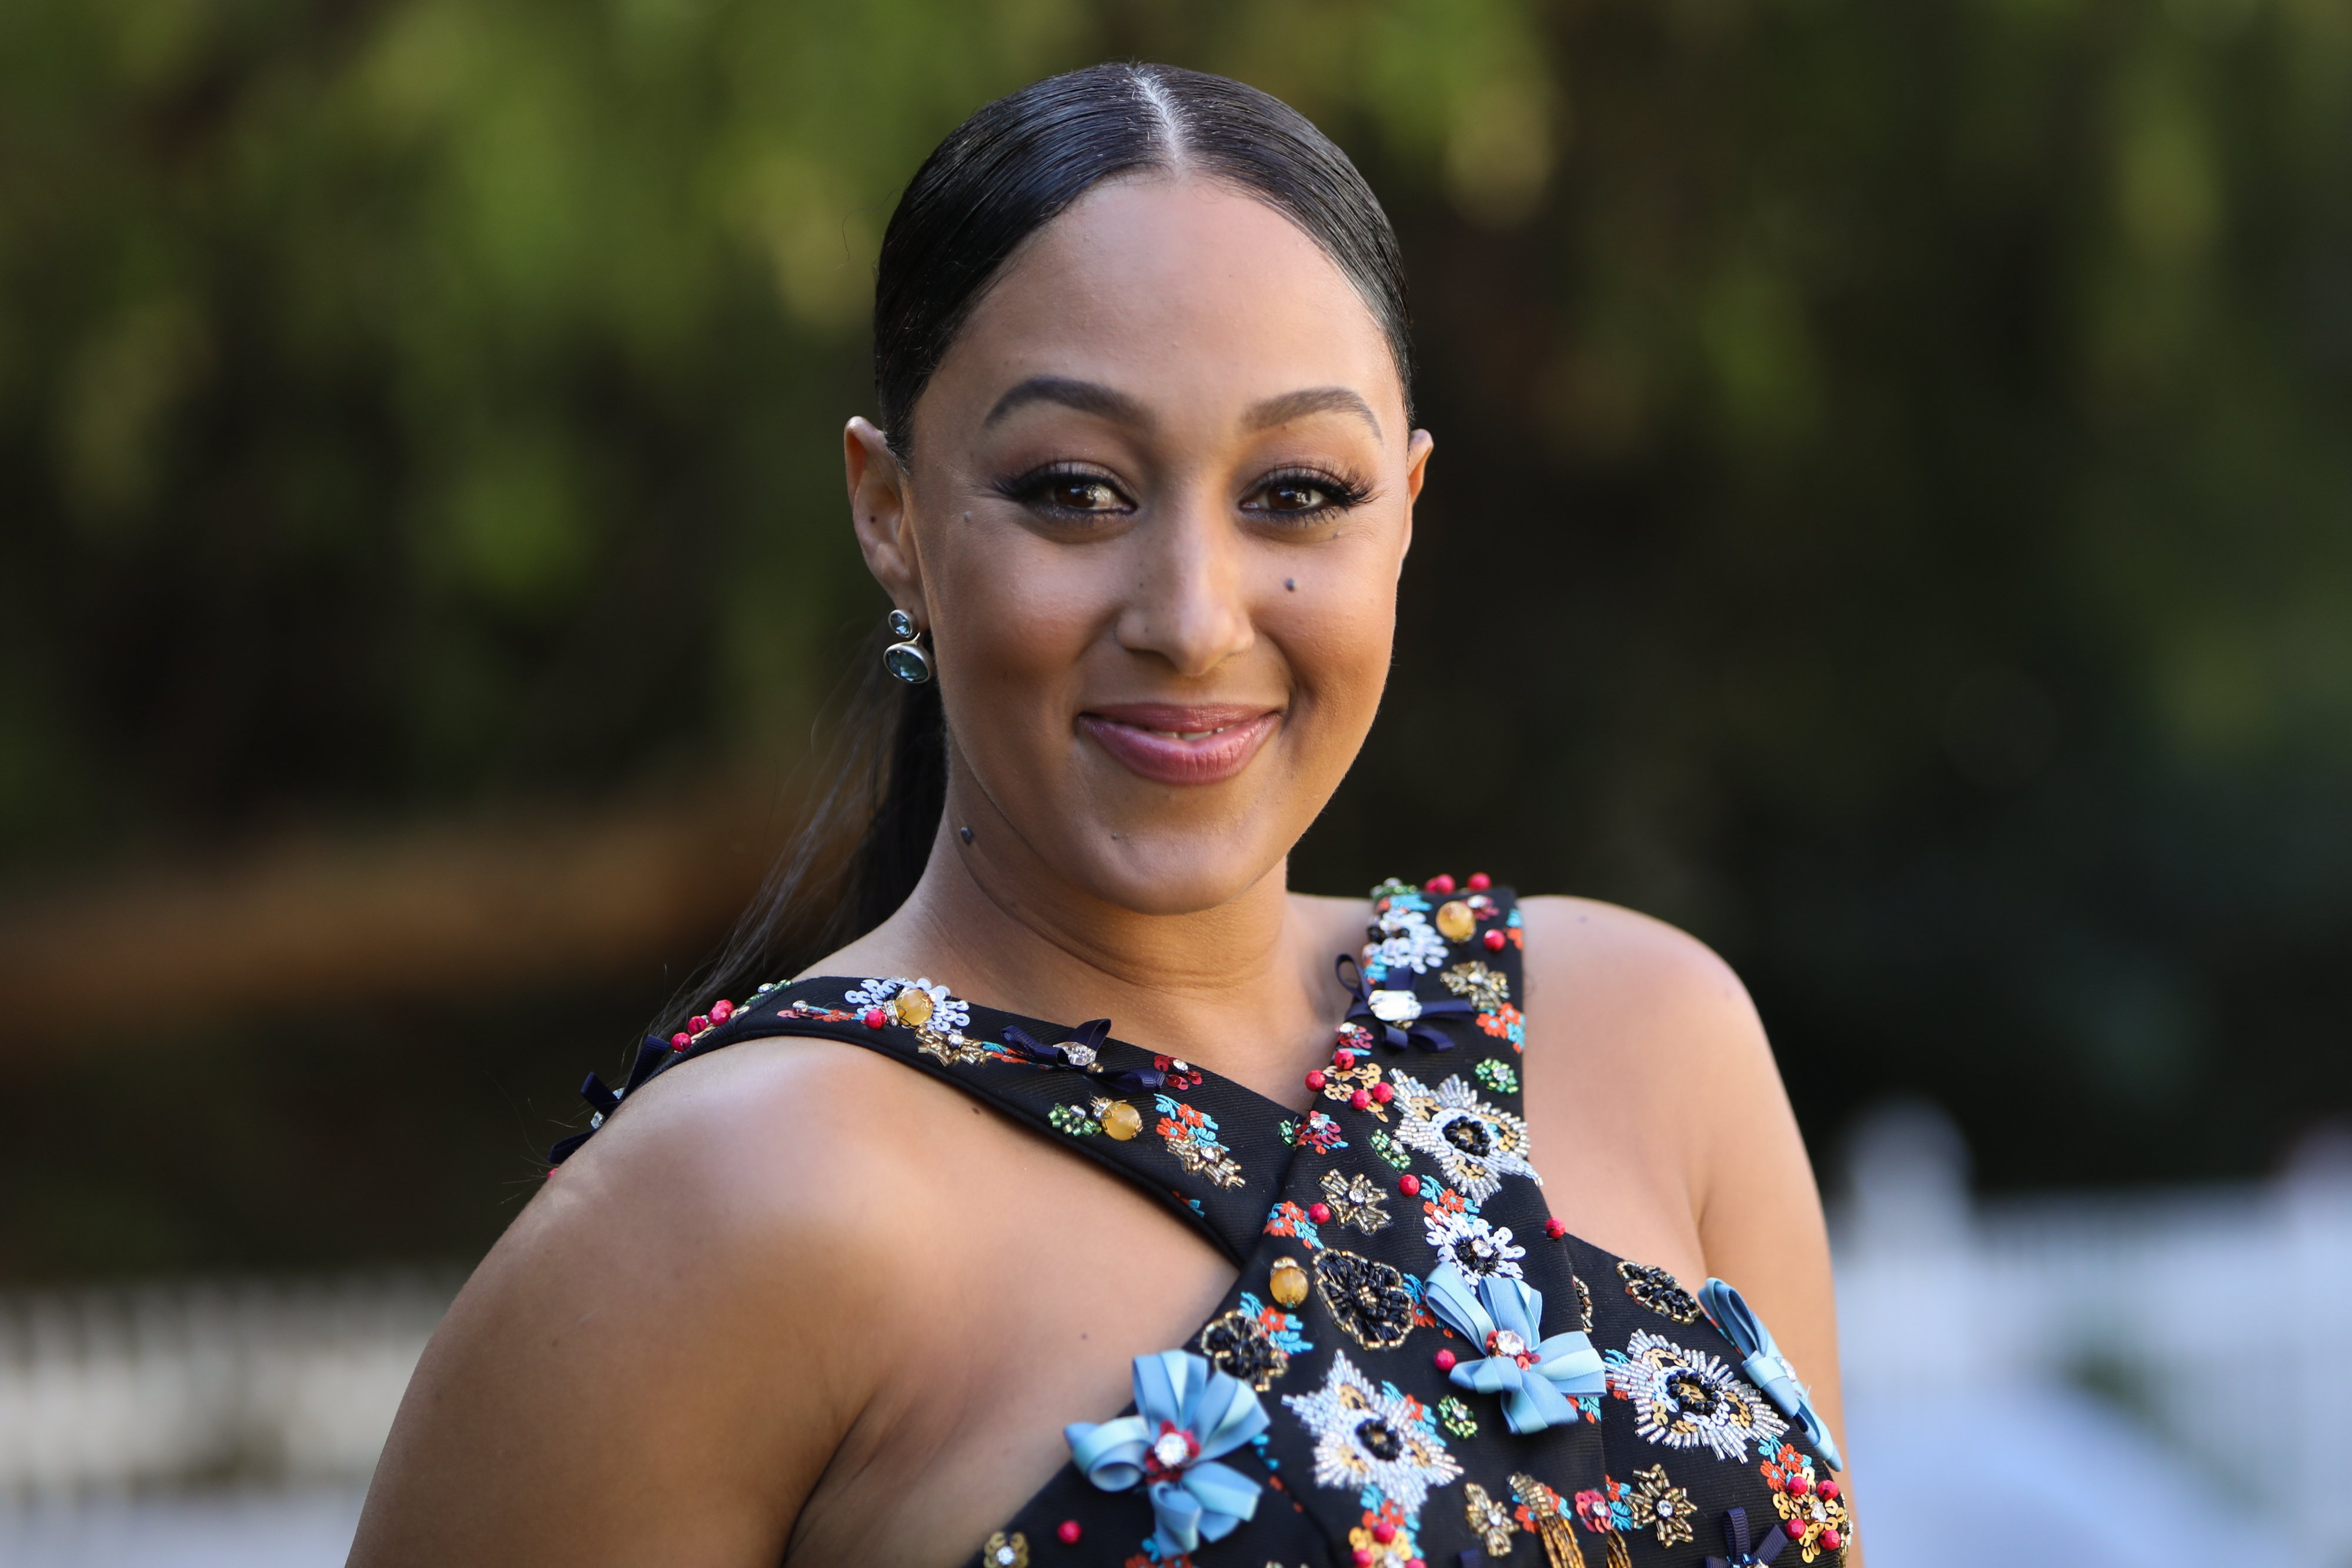 Tamera Mowry pictured at Universal Studios Hollywood on November 07, 2019 in Universal City, California. | Source: Getty Images